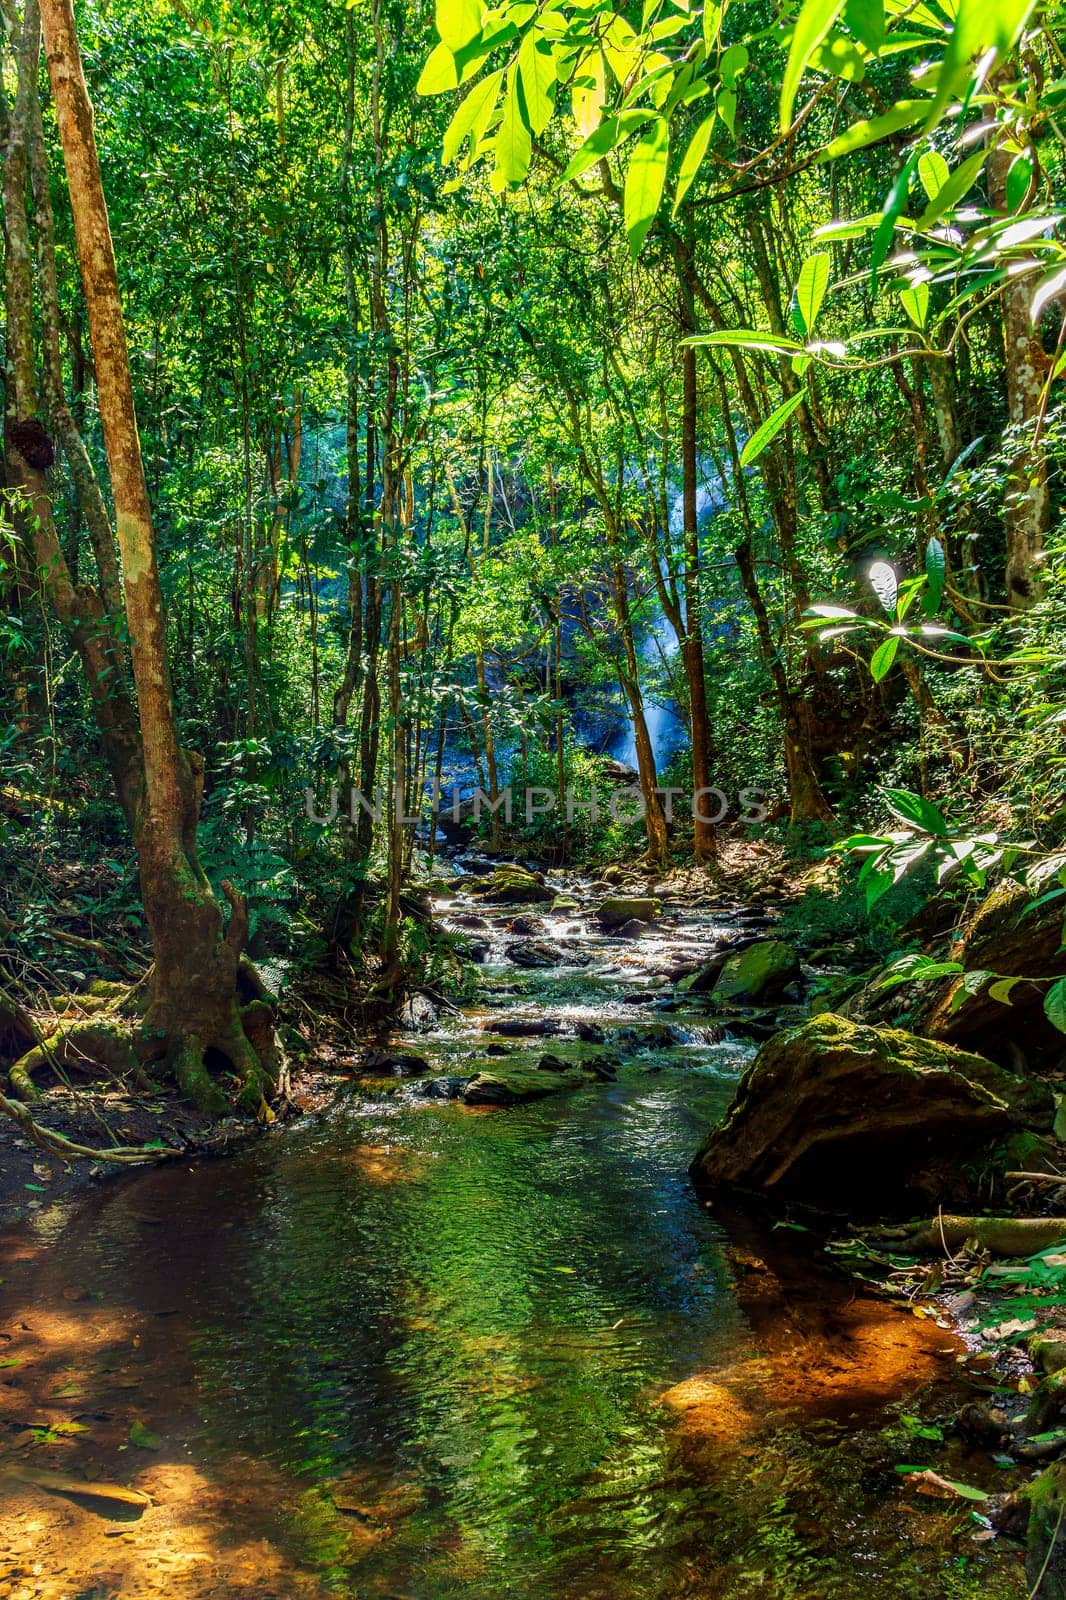 Dense rainforest vegetation crossed by the river amidst the rocks with the waterfall hidden in the background behind the trees in Minas Gerais, Brazil